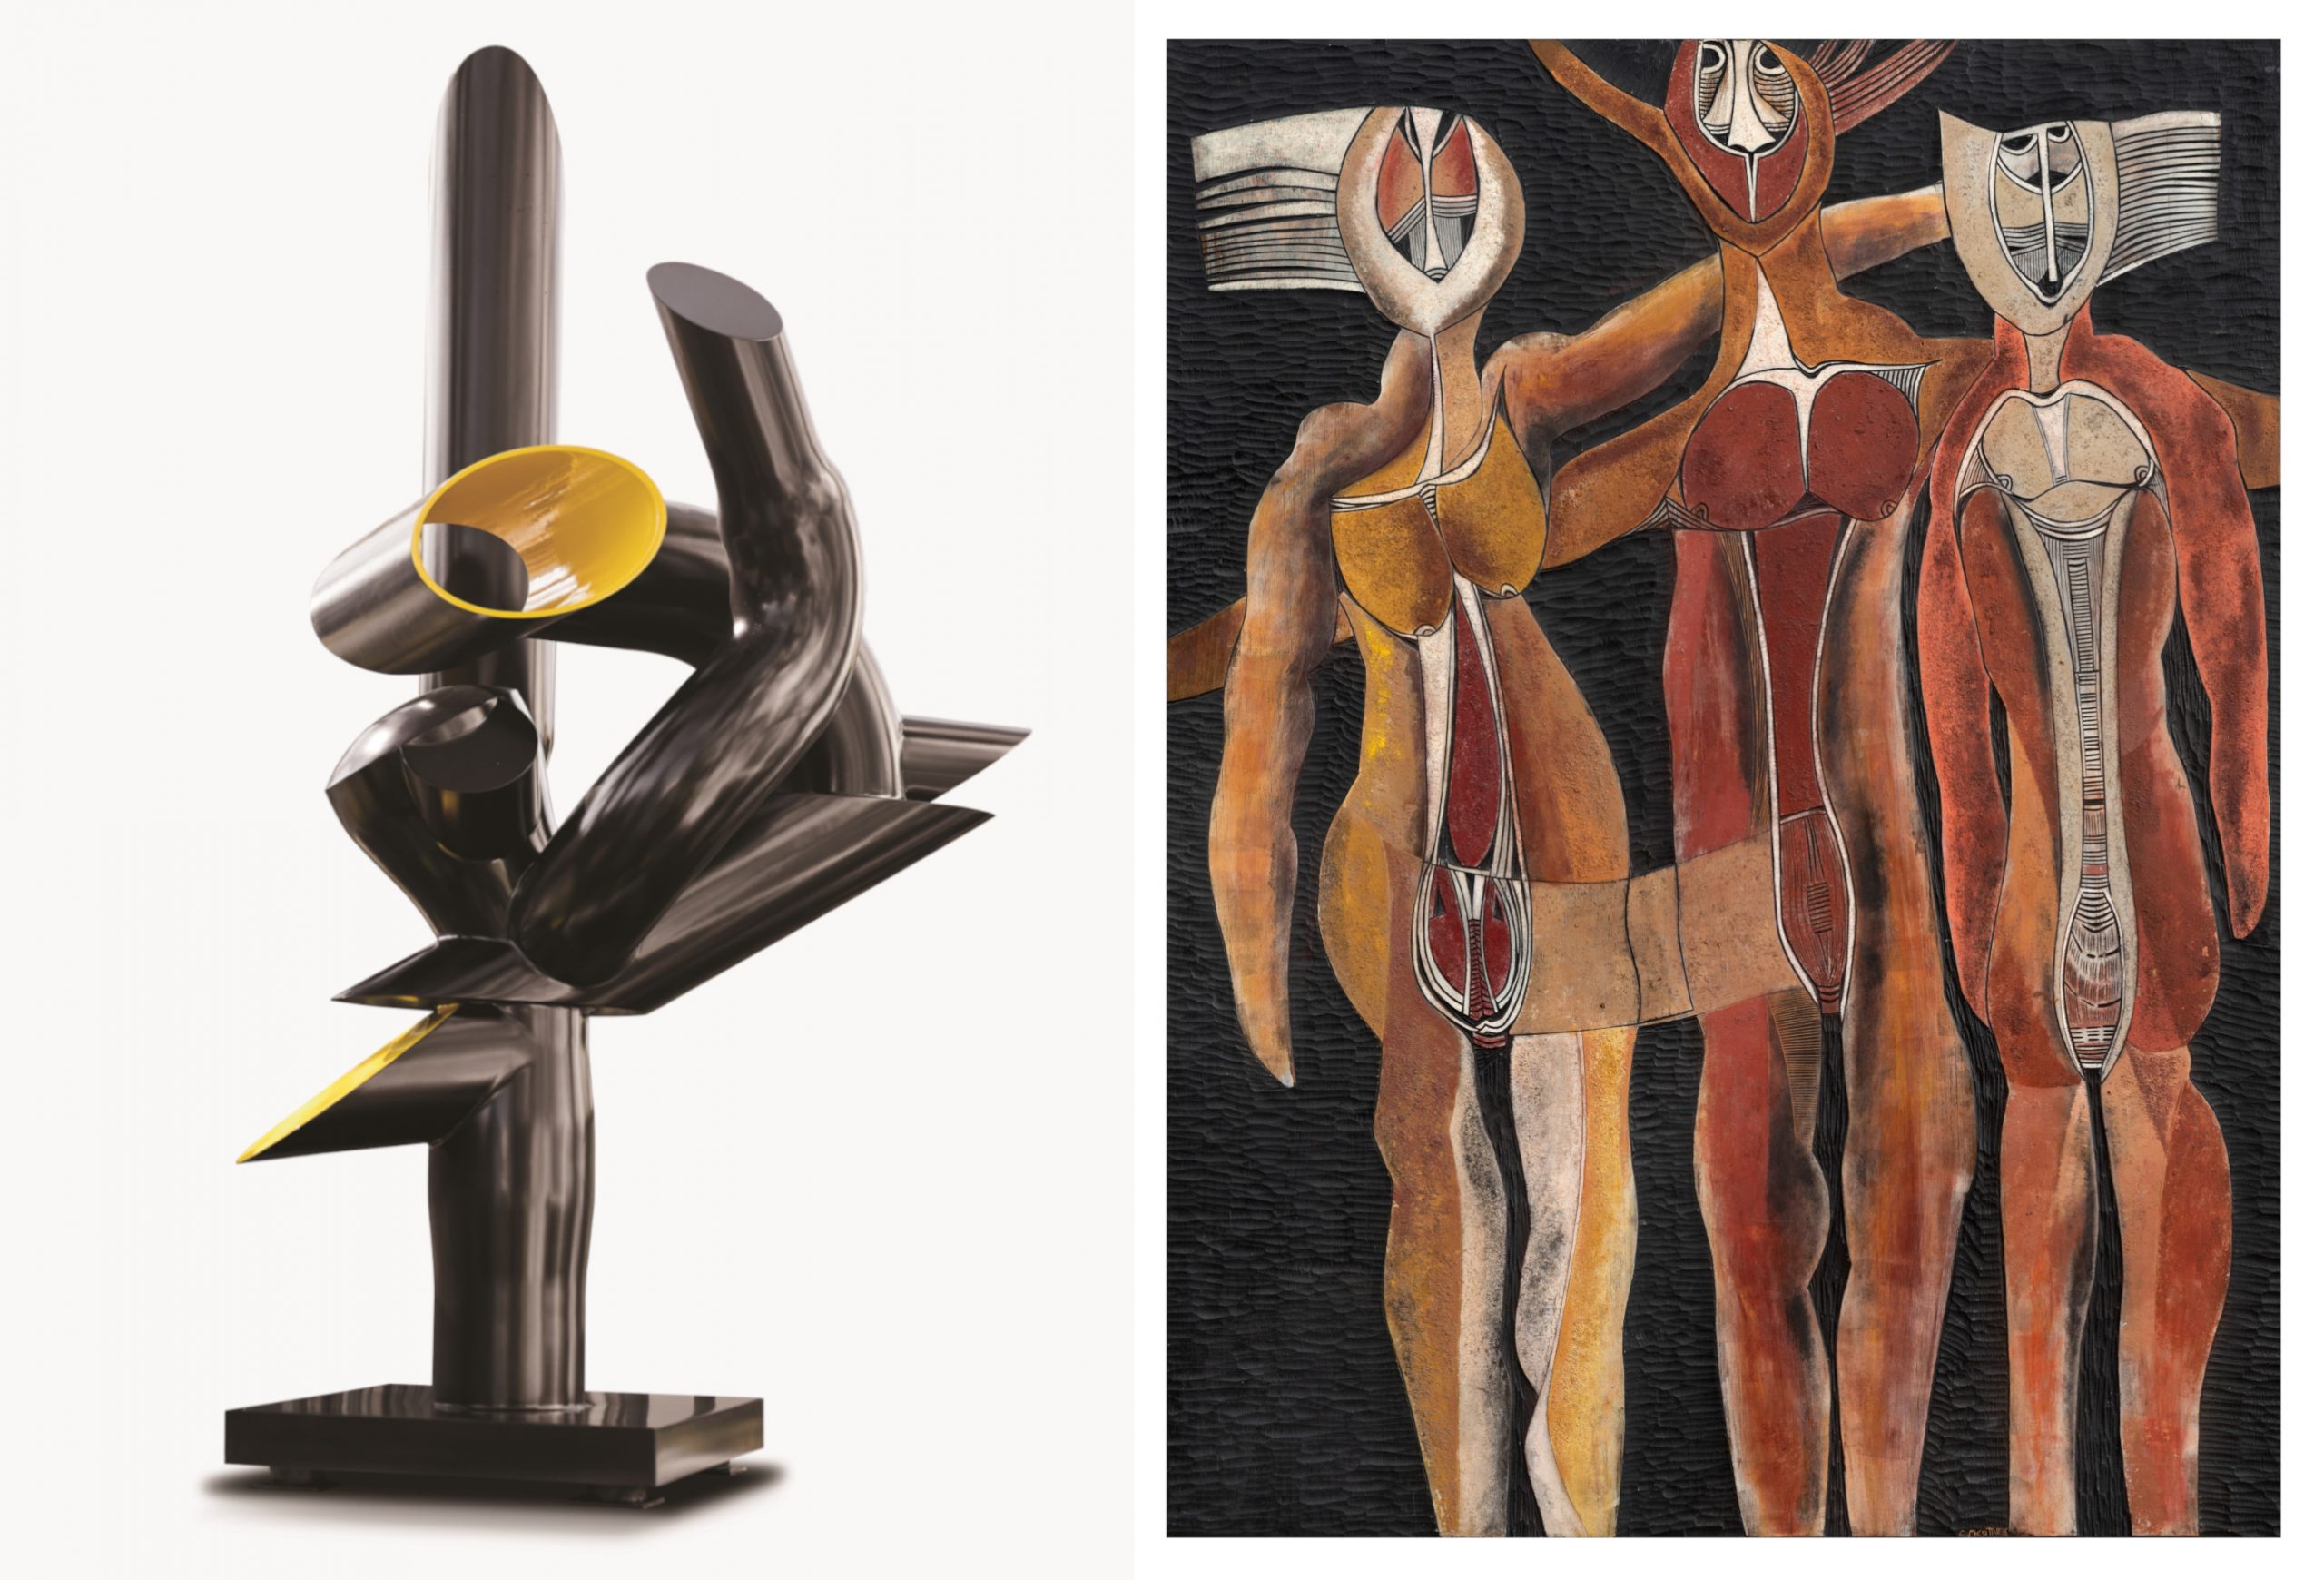 Works by Edoardo Villa and Cecil Skotnes in Aspire Art auction on South African Black Modernists